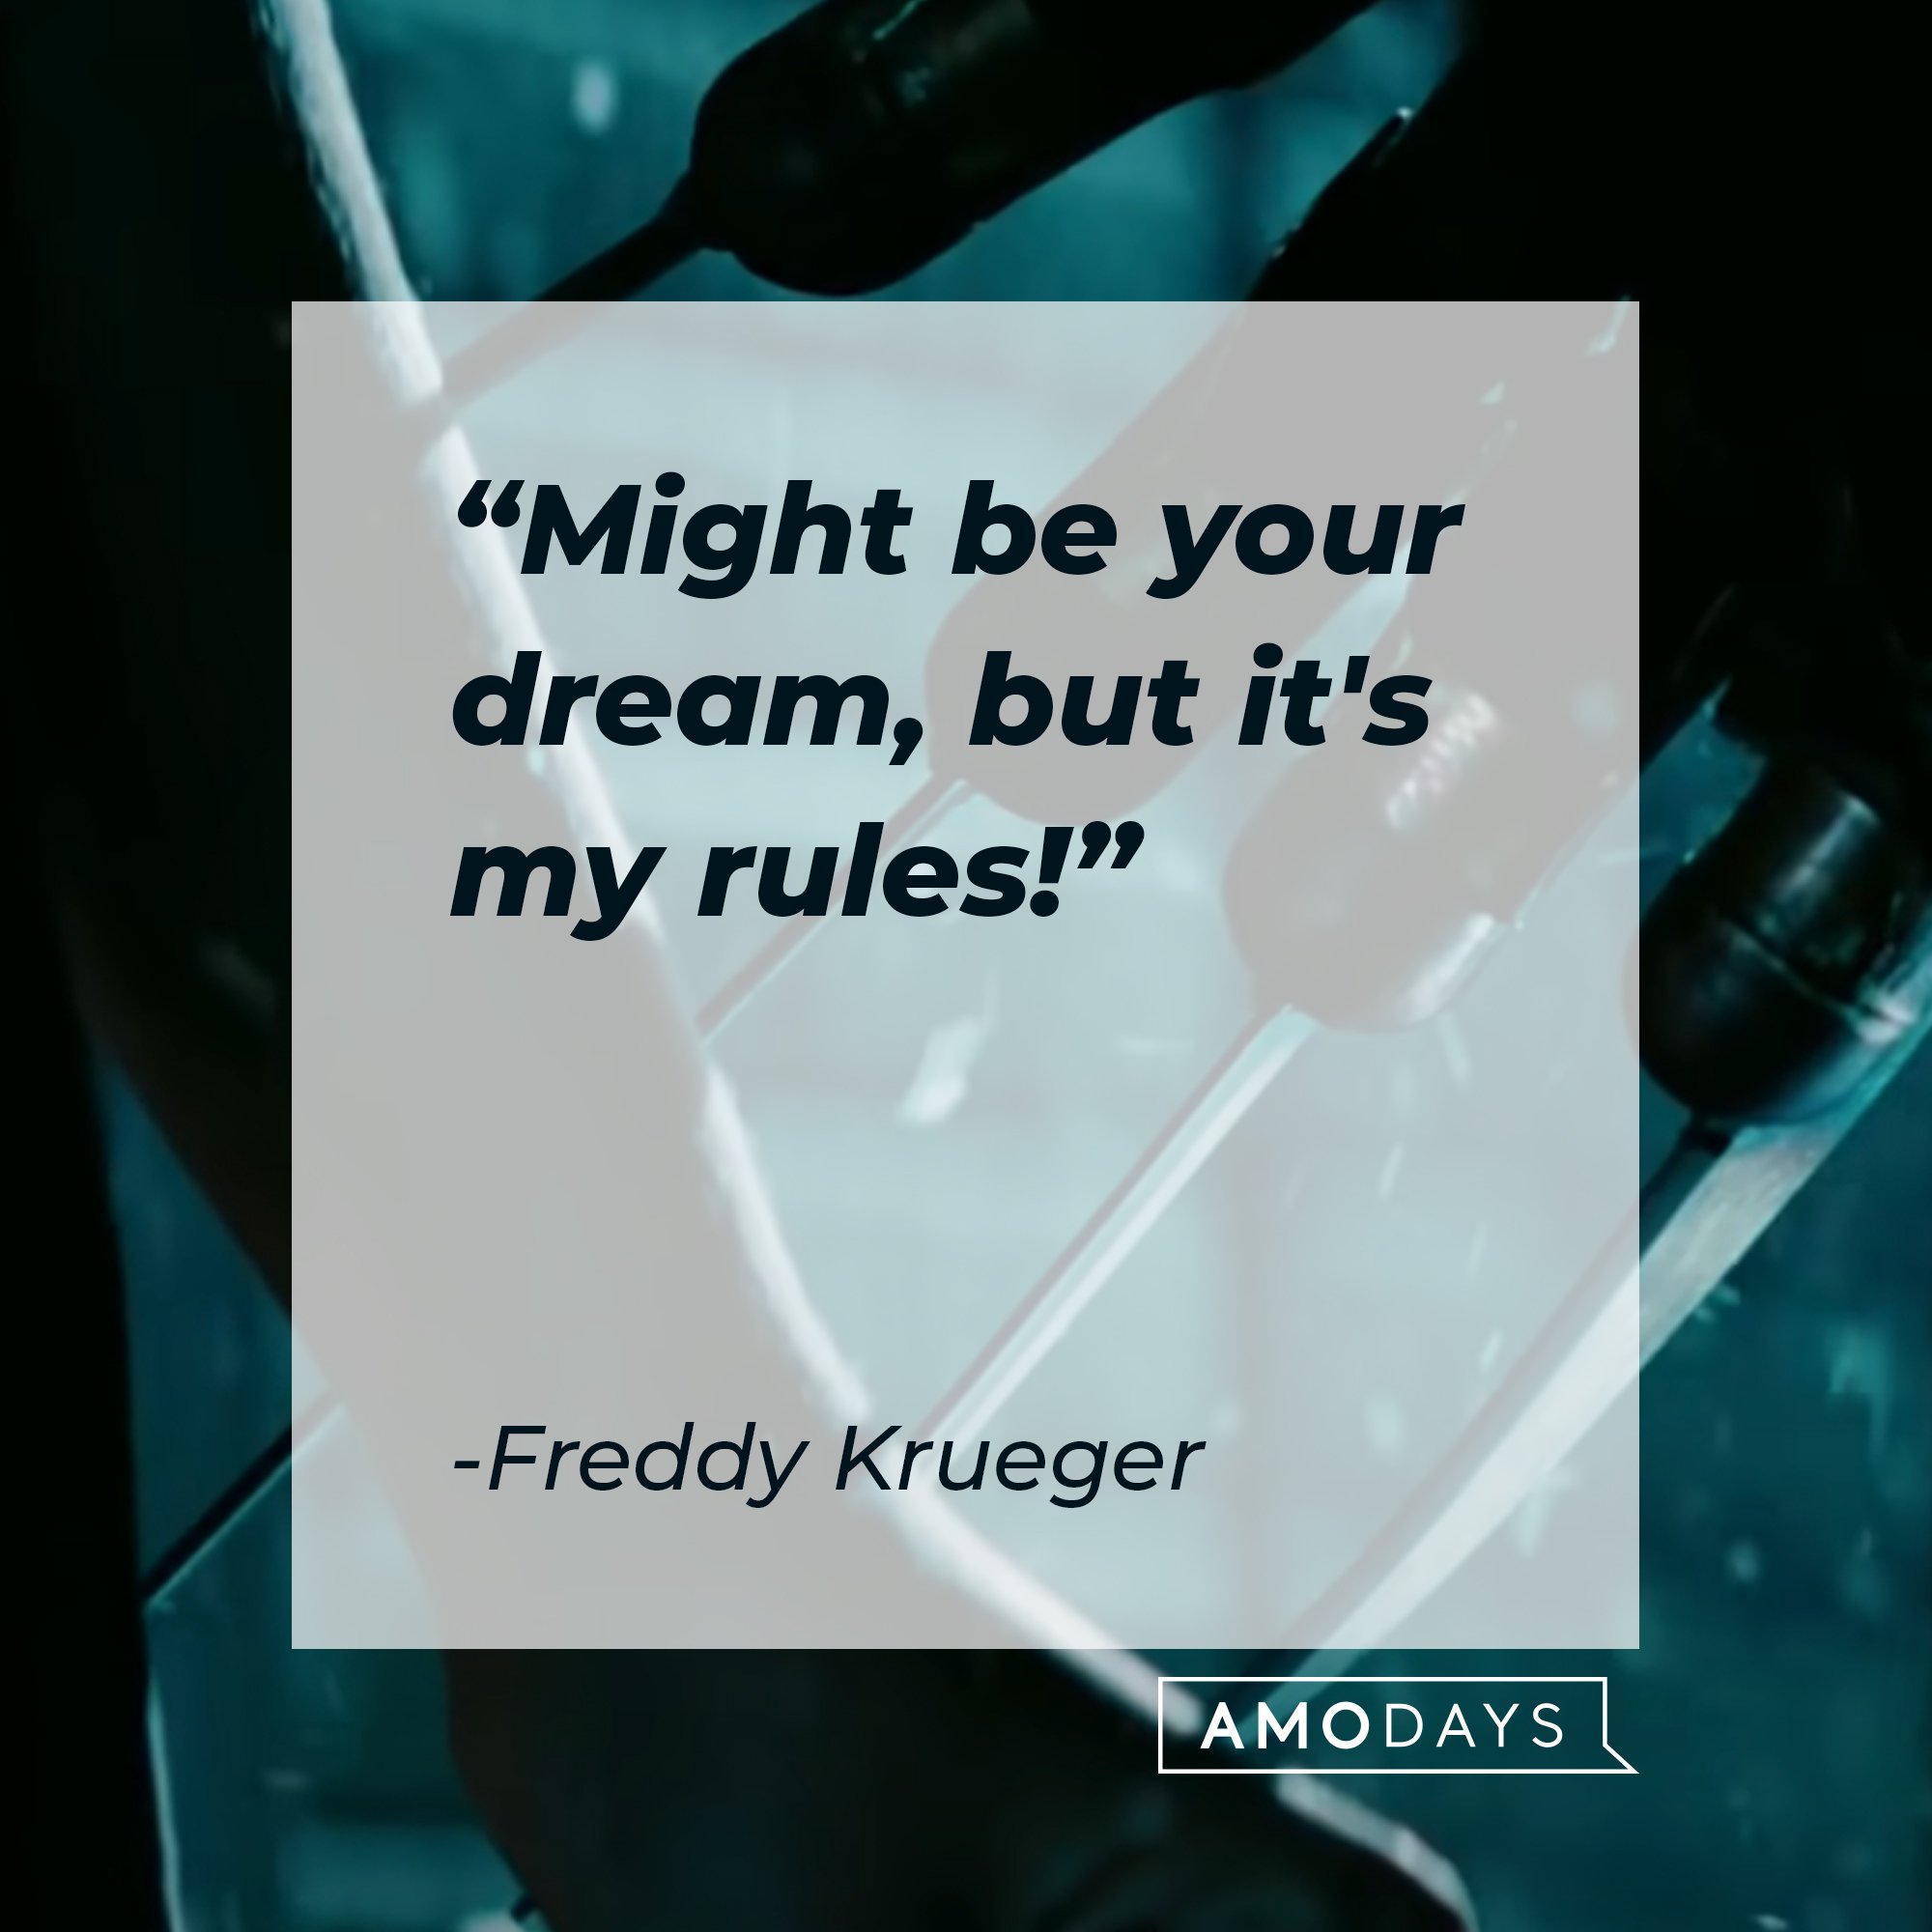 Freddy Krueger’s quote: “Might be your dream, but it's my rules!" | Image: AmoDays